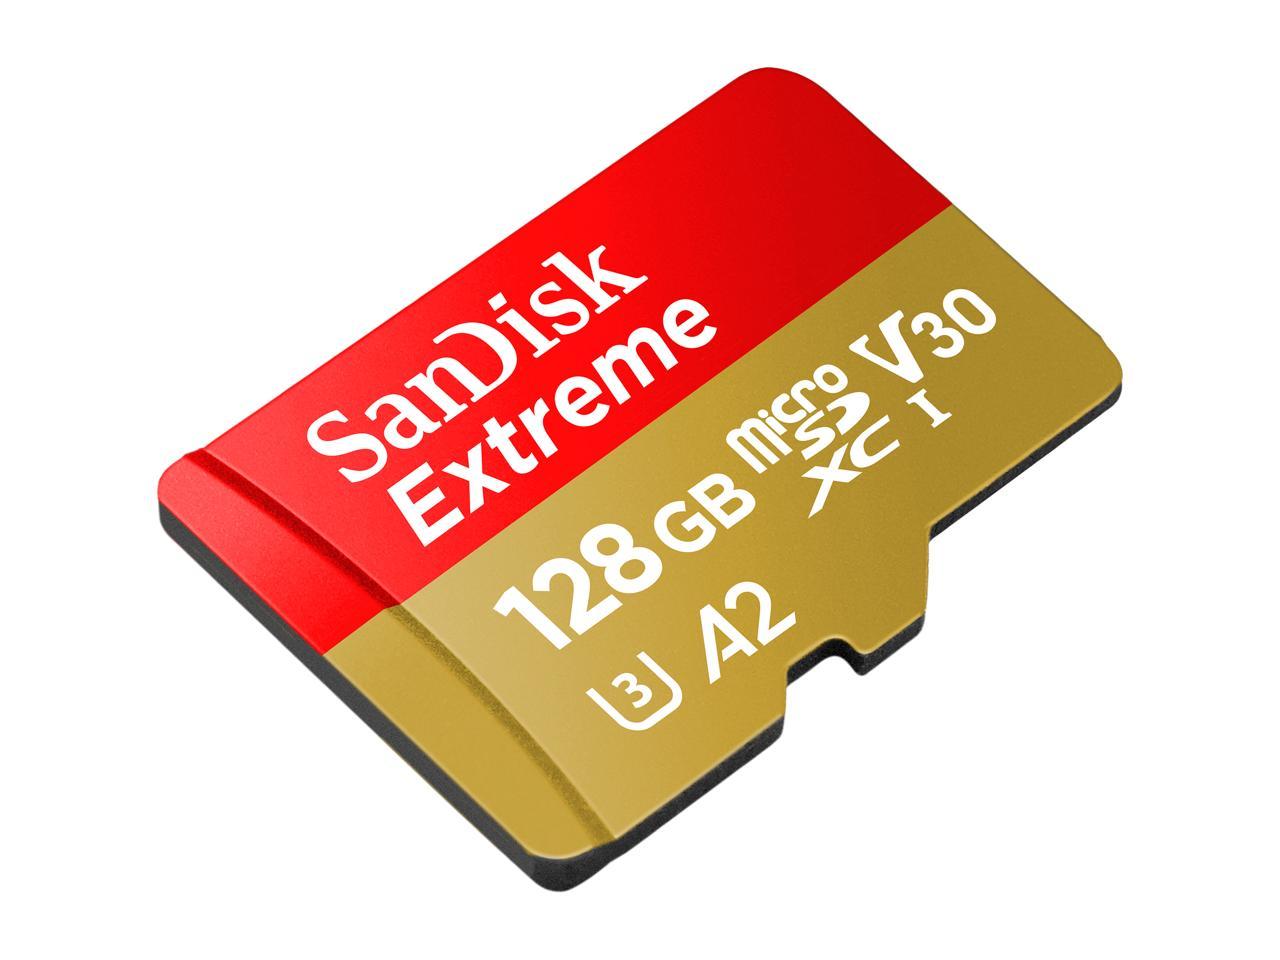 Sandisk 1Tb Extreme Microsdxc Uhs-I/U3 A2 Memory Card With Adapter, Speed Up To 160Mb/S (Sdsqxa1-1T00-Gn6Ma)